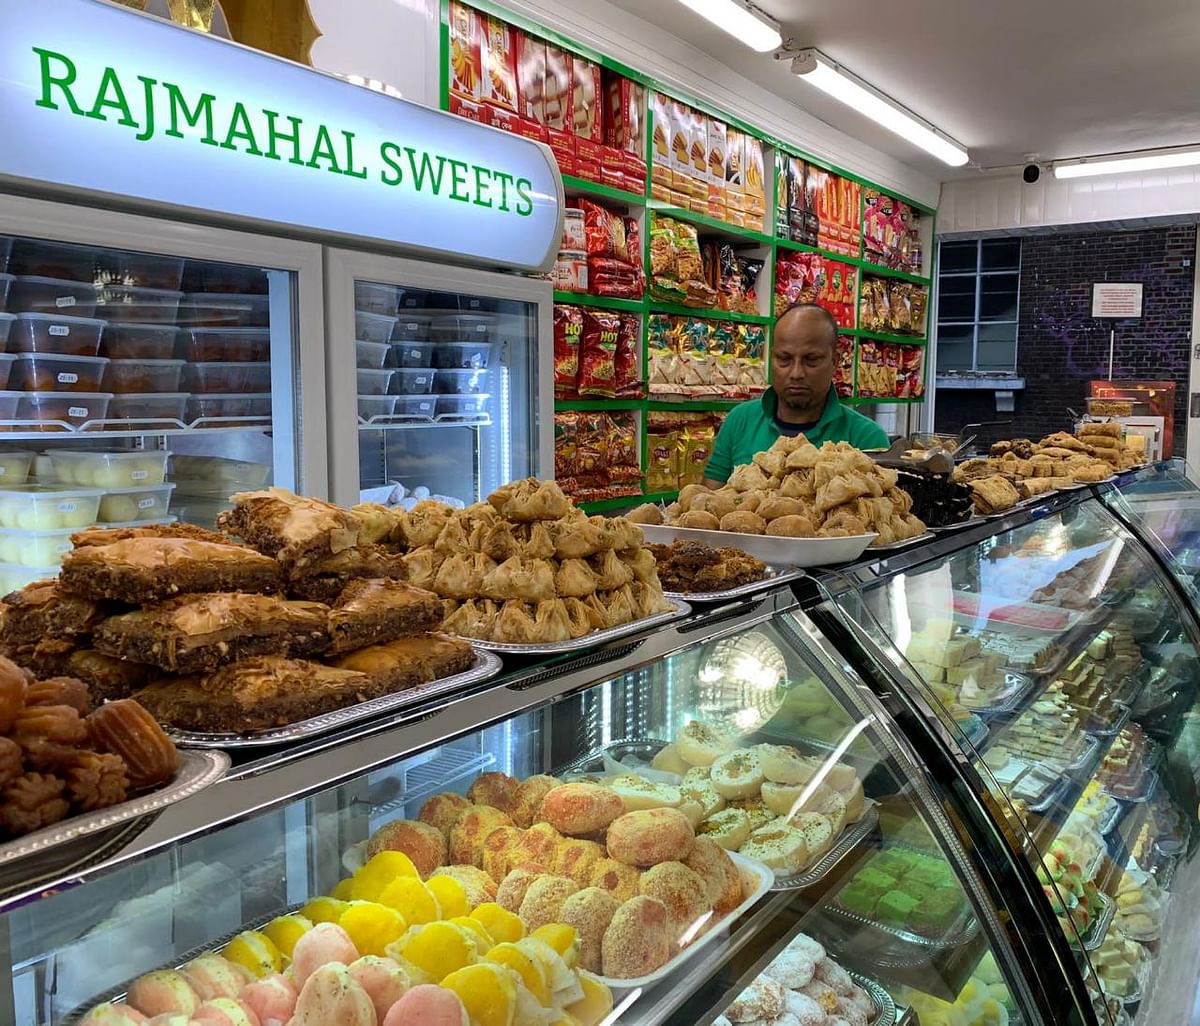 A snapshot of London’s mithai shops that make Diwali celebrations in the city all the more special.